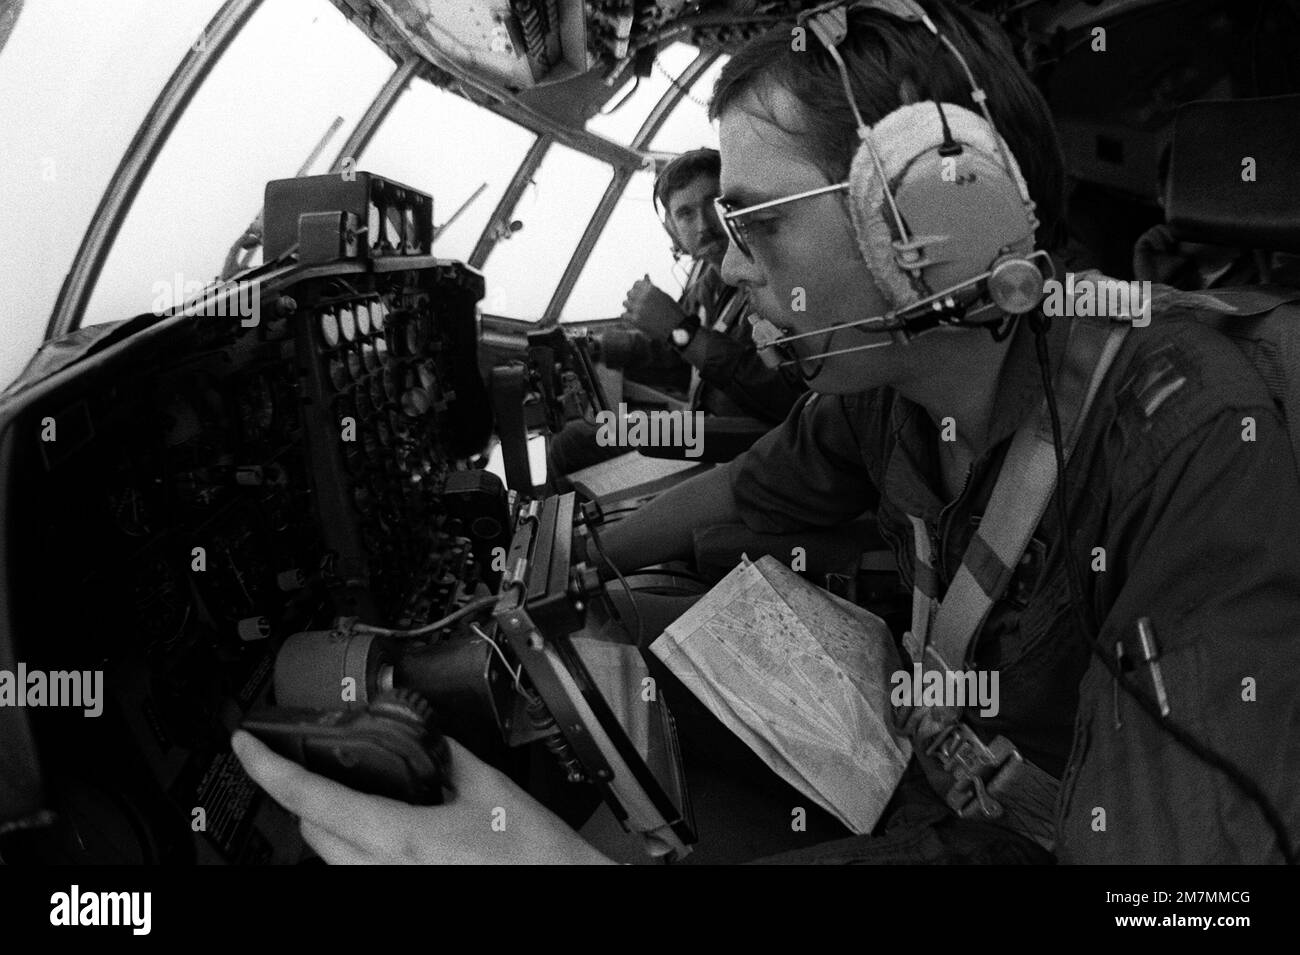 CPT Dikki Stanley of the 54th Weather Reconnaissance Squadron pilots a WC-130 Hercules aircraft through a typhoon in order to get first hand information on barometric pressure, wind strength, temperatures and directions. This information is relayed to meterorological specialists at the Joint Typhoon Warning Center. Base: Andersen Air Base Country: Guam (GUM) Stock Photo